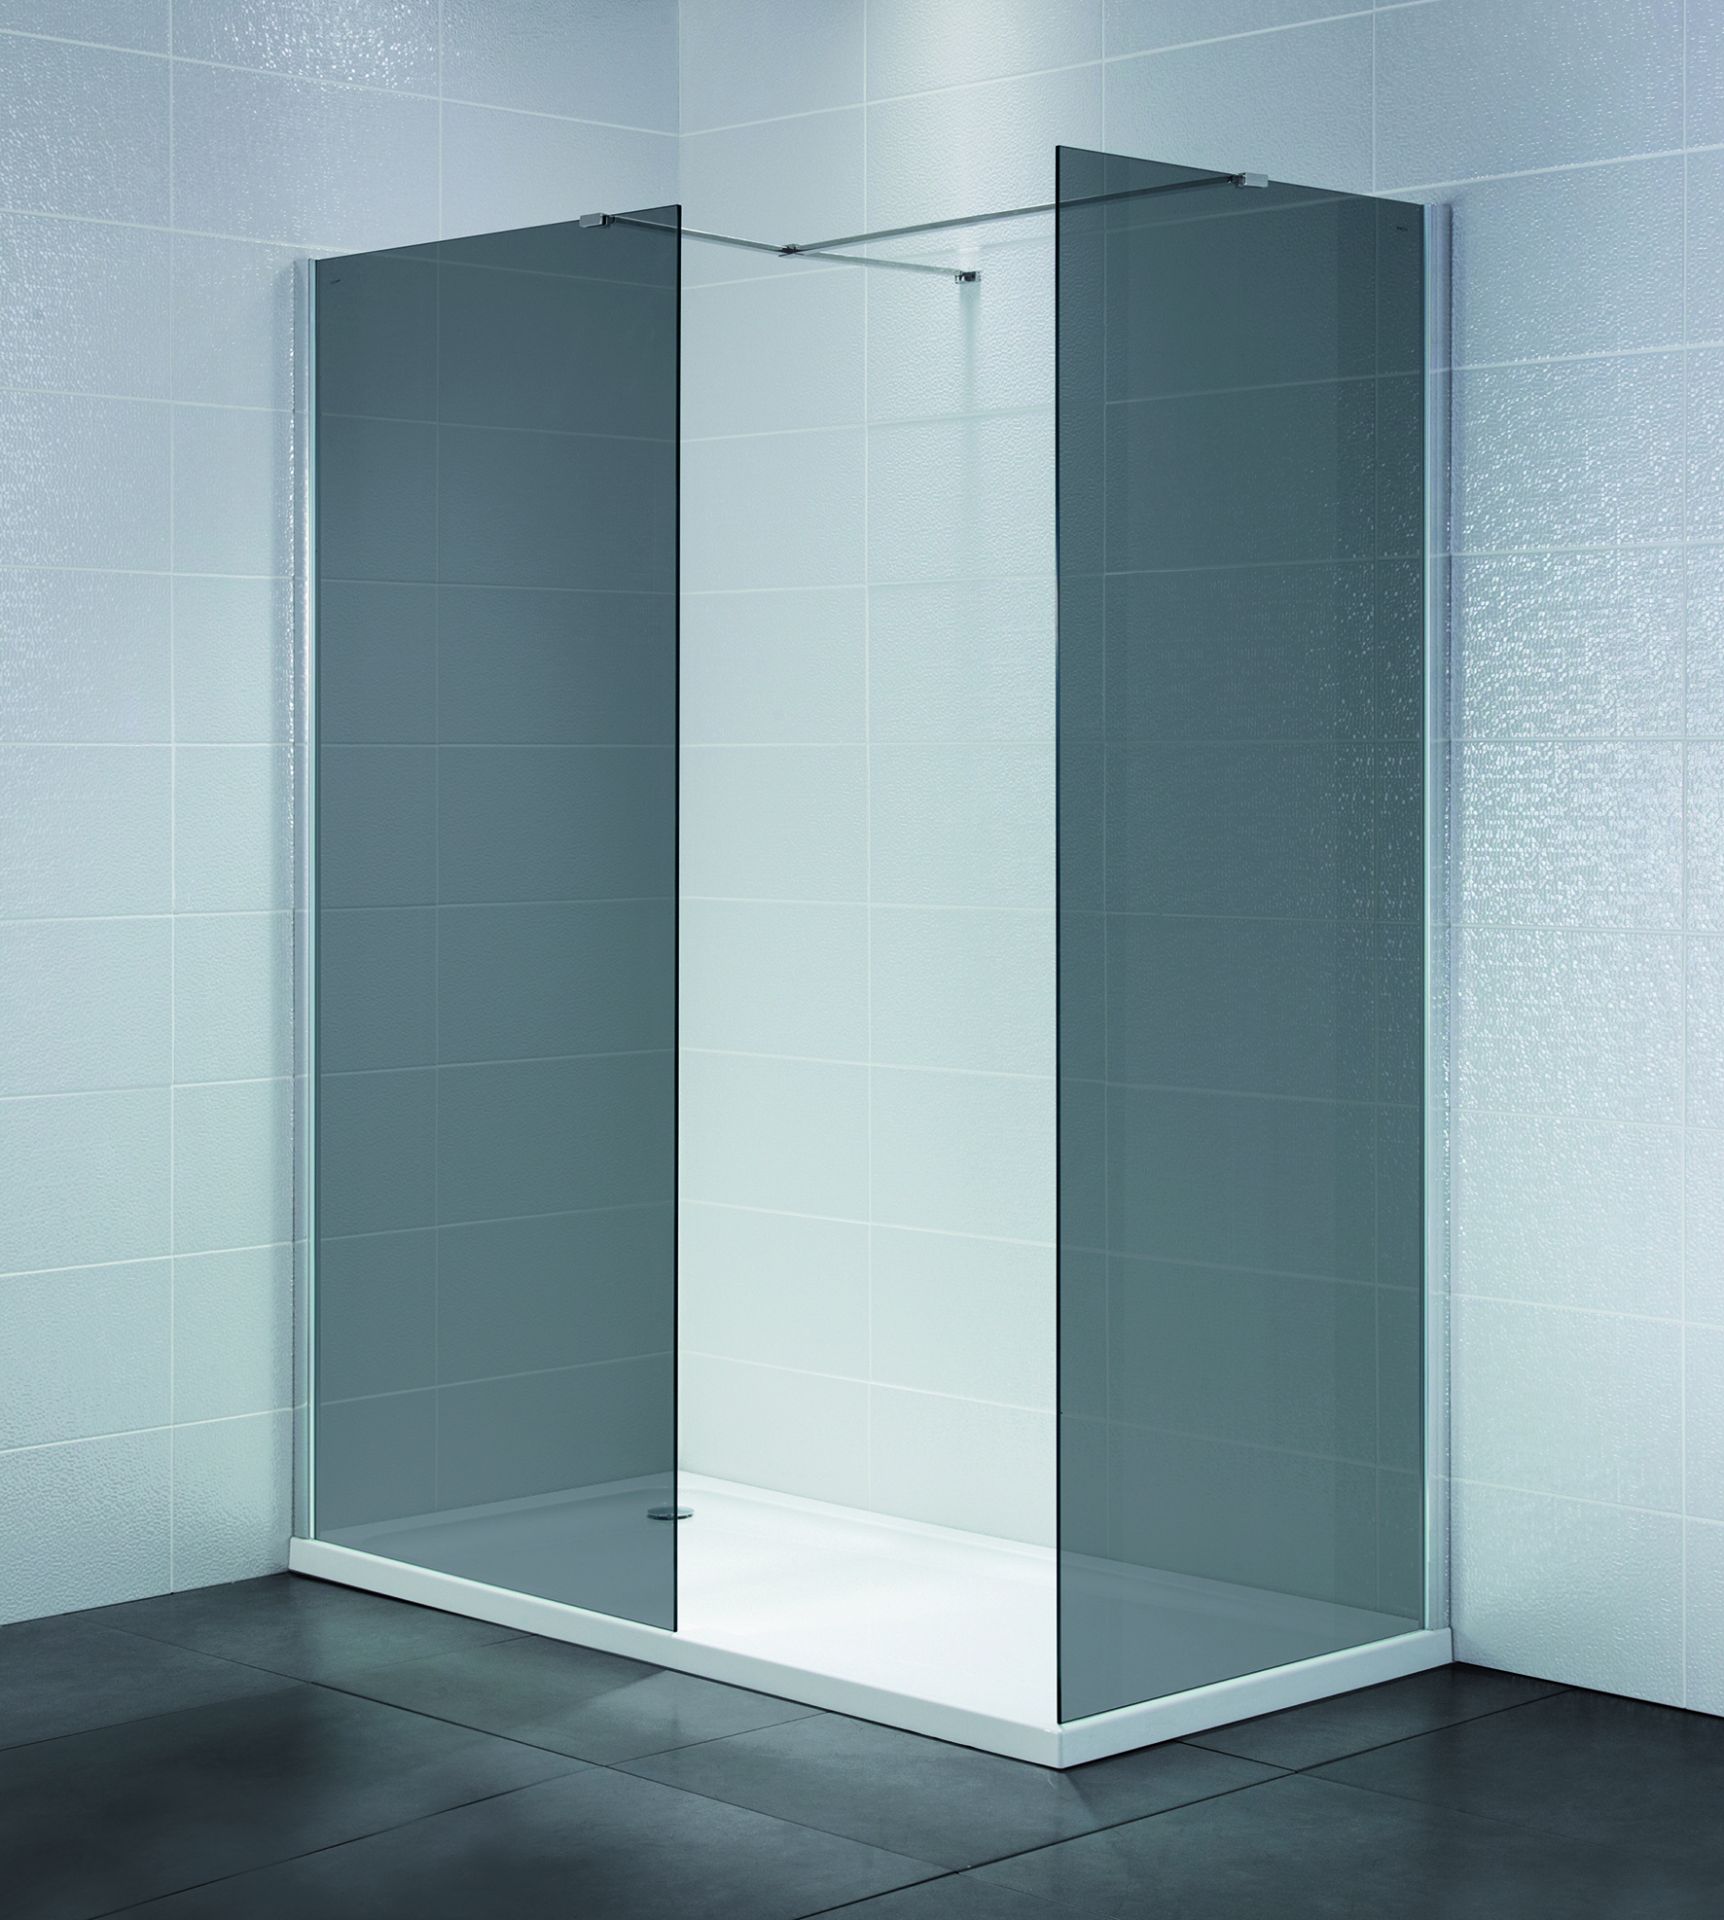 2 X BRAND NEW IDENTITI APRIL 1000MM WIDE x 1950 HIGH x 8MM THICK SMOKED GLASS WETROOM PANELS (